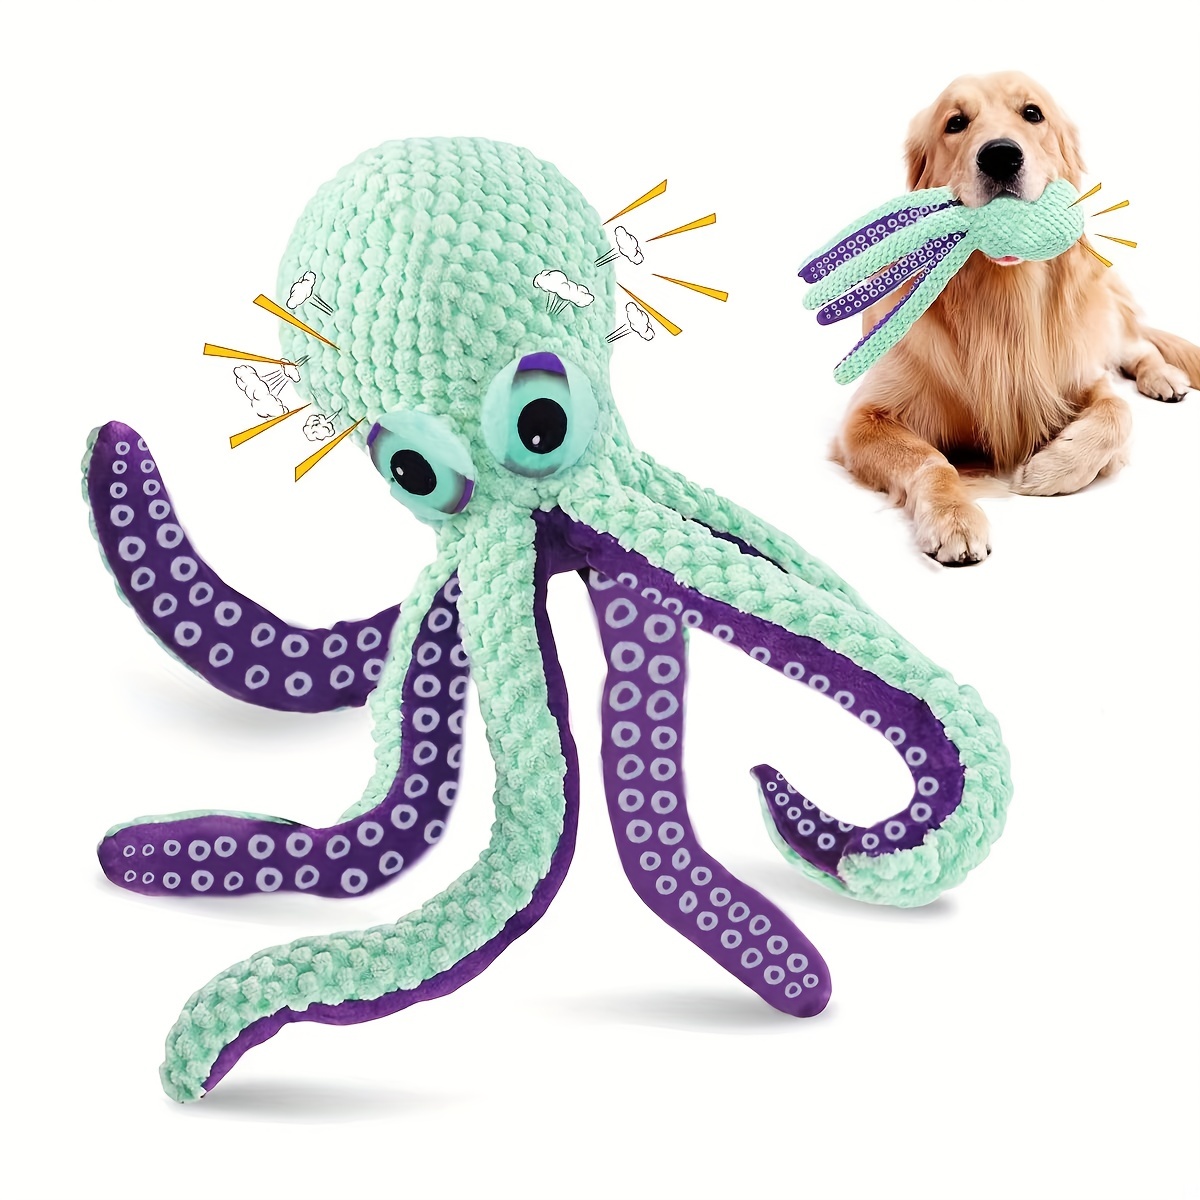 1pc Pet Dog Toy, Bite Resistant, Plush Cartoon Toy With Sound For Dogs To  Play With And Enjoy